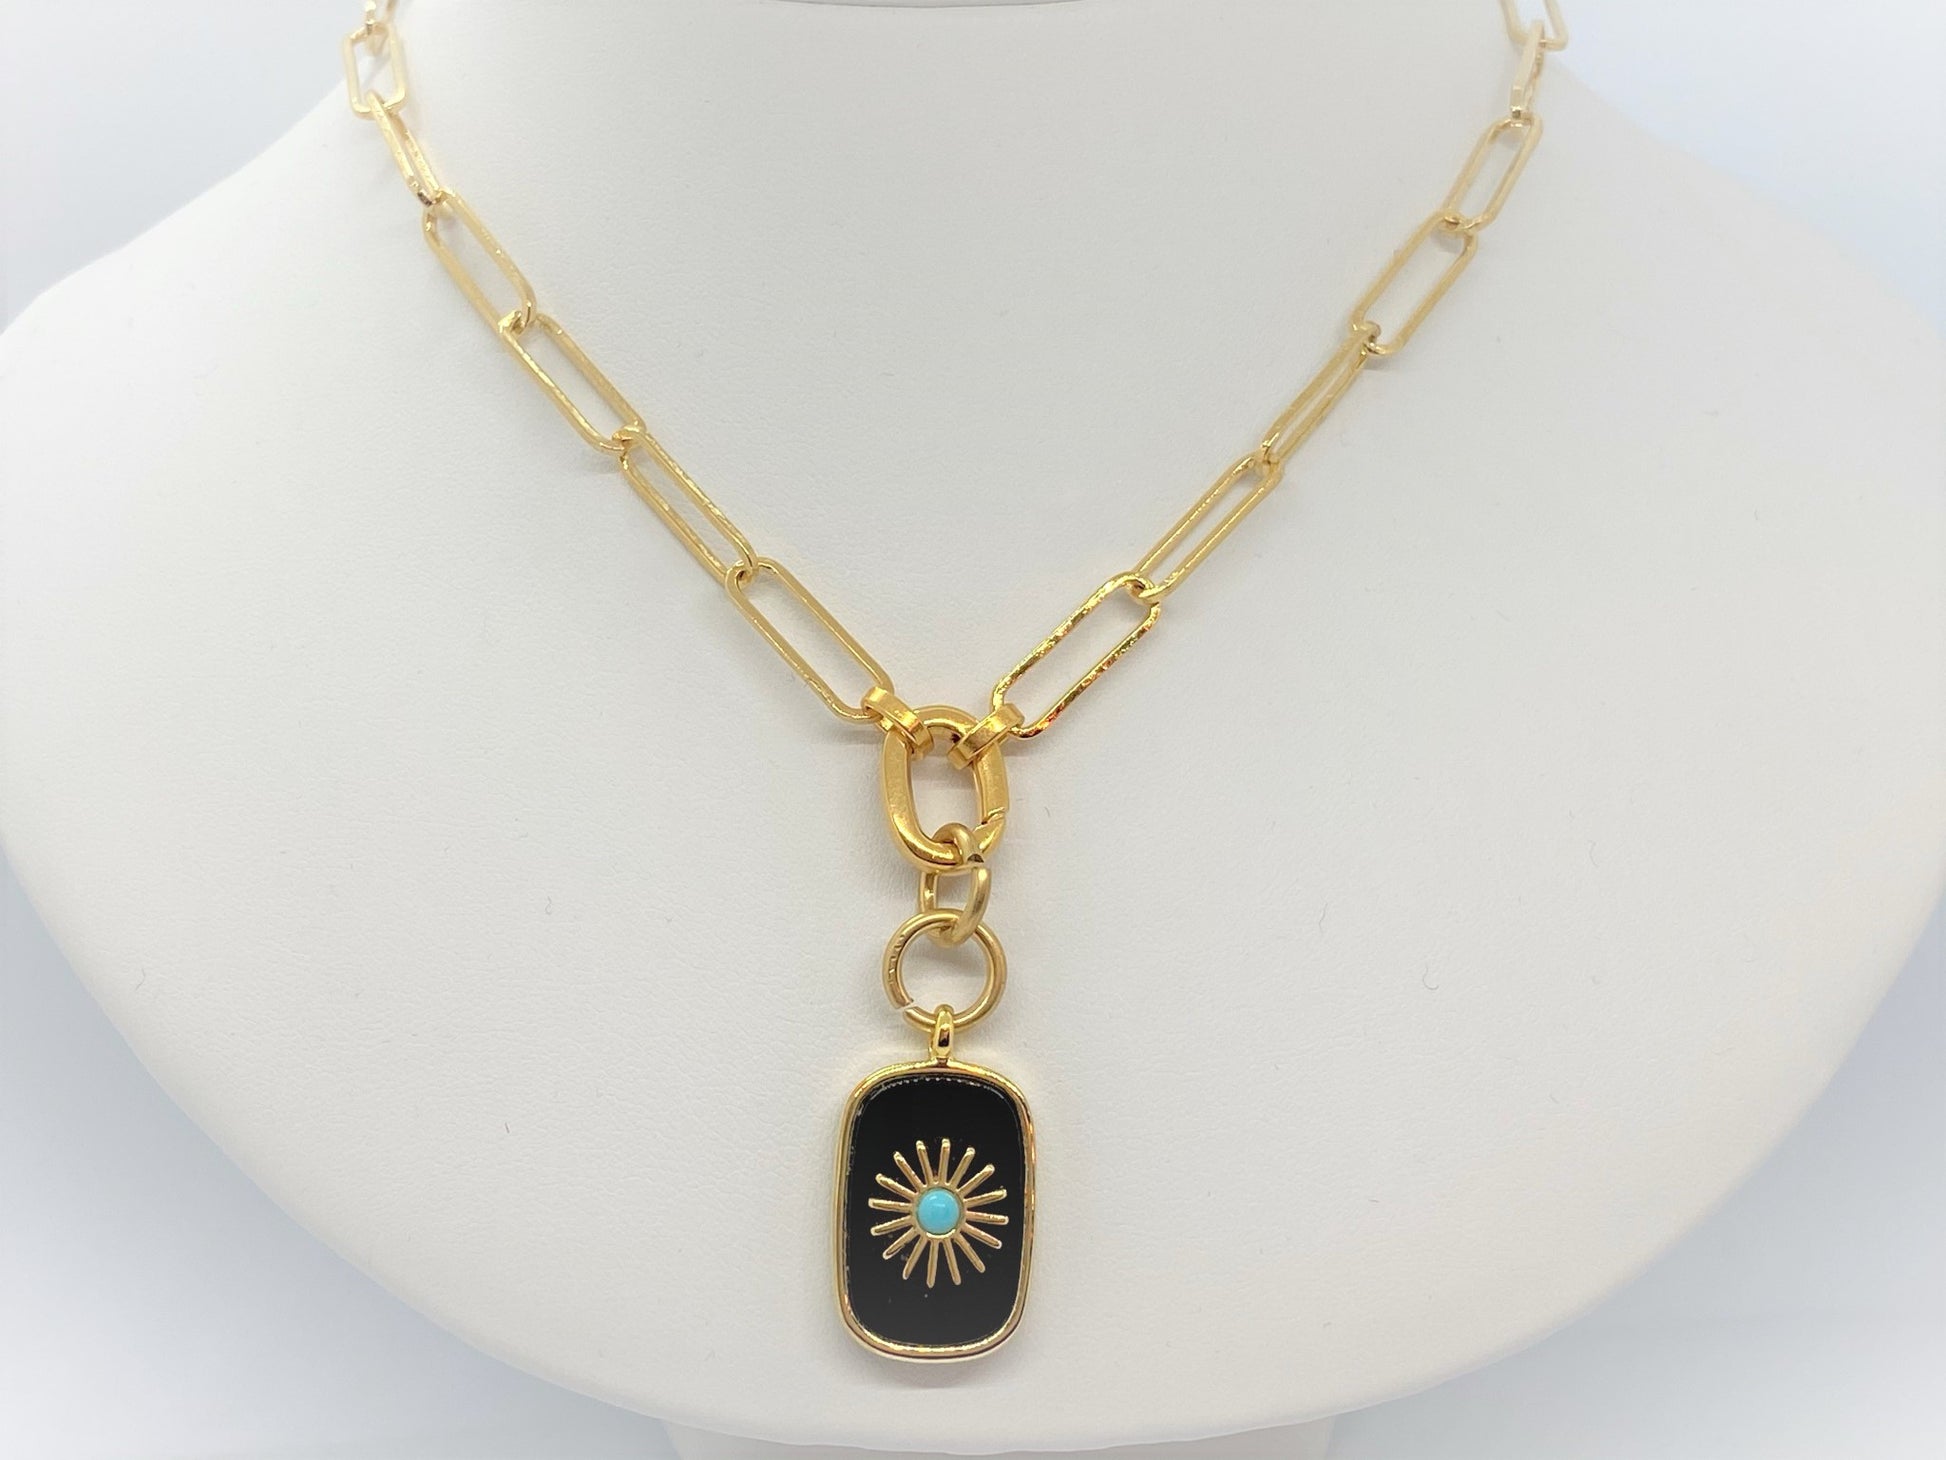 Gold Plated Paperclip Necklace with a Gemstone Pendant - Emmis Jewelry, Necklace, [product_color]